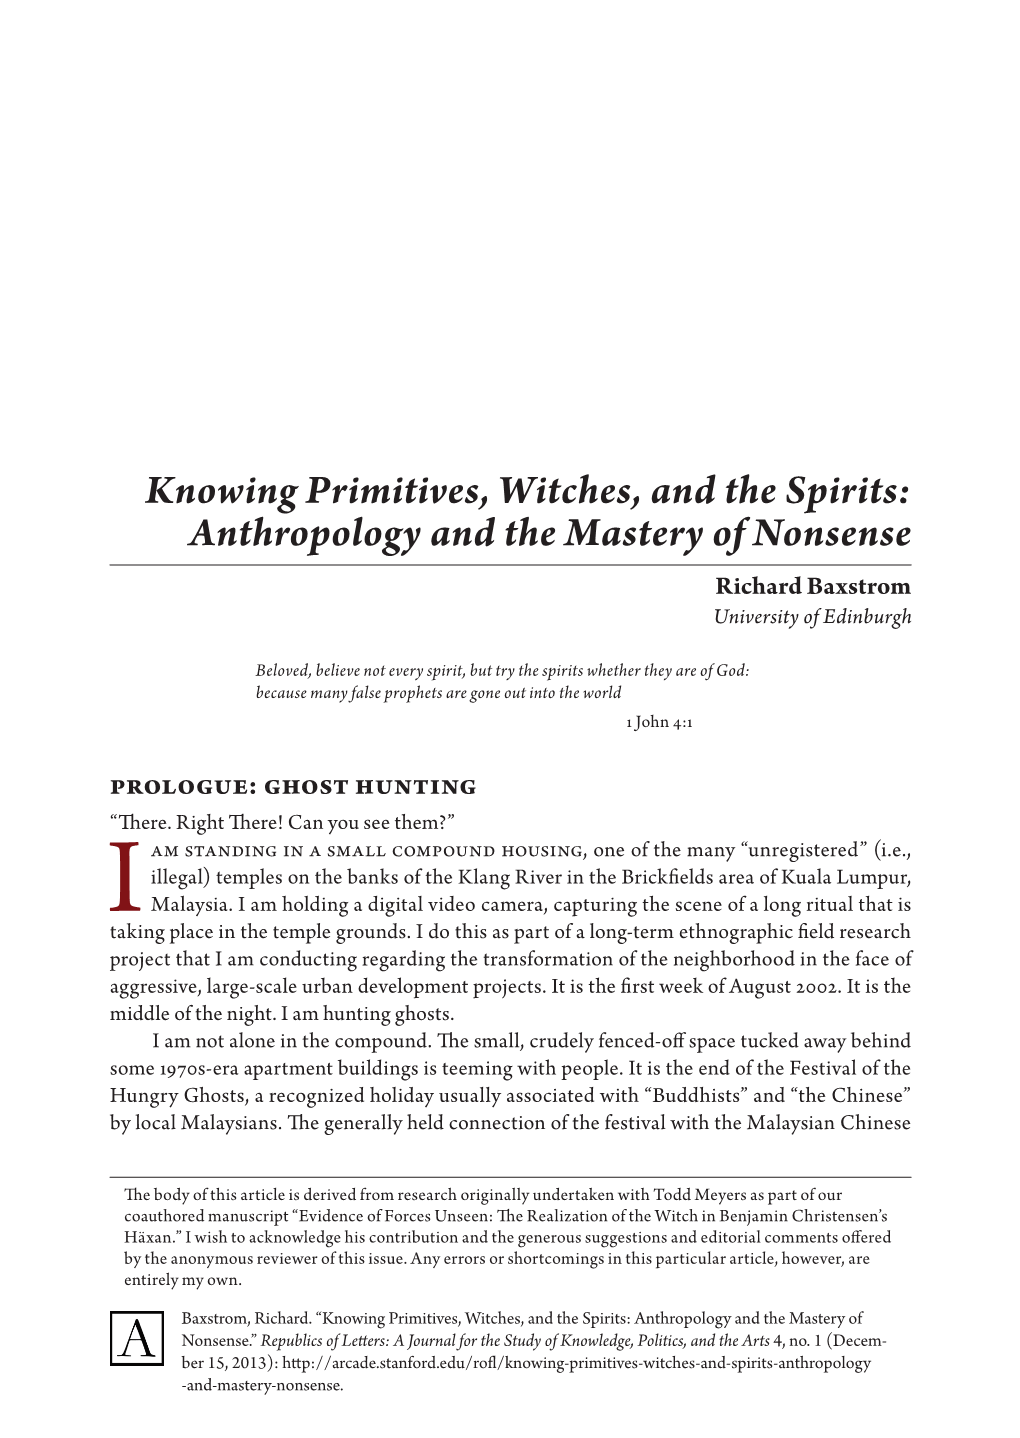 Knowing Primitives, Witches, and the Spirits: Anthropology and the Mastery of Nonsense Richard Baxstrom University of Edinburgh